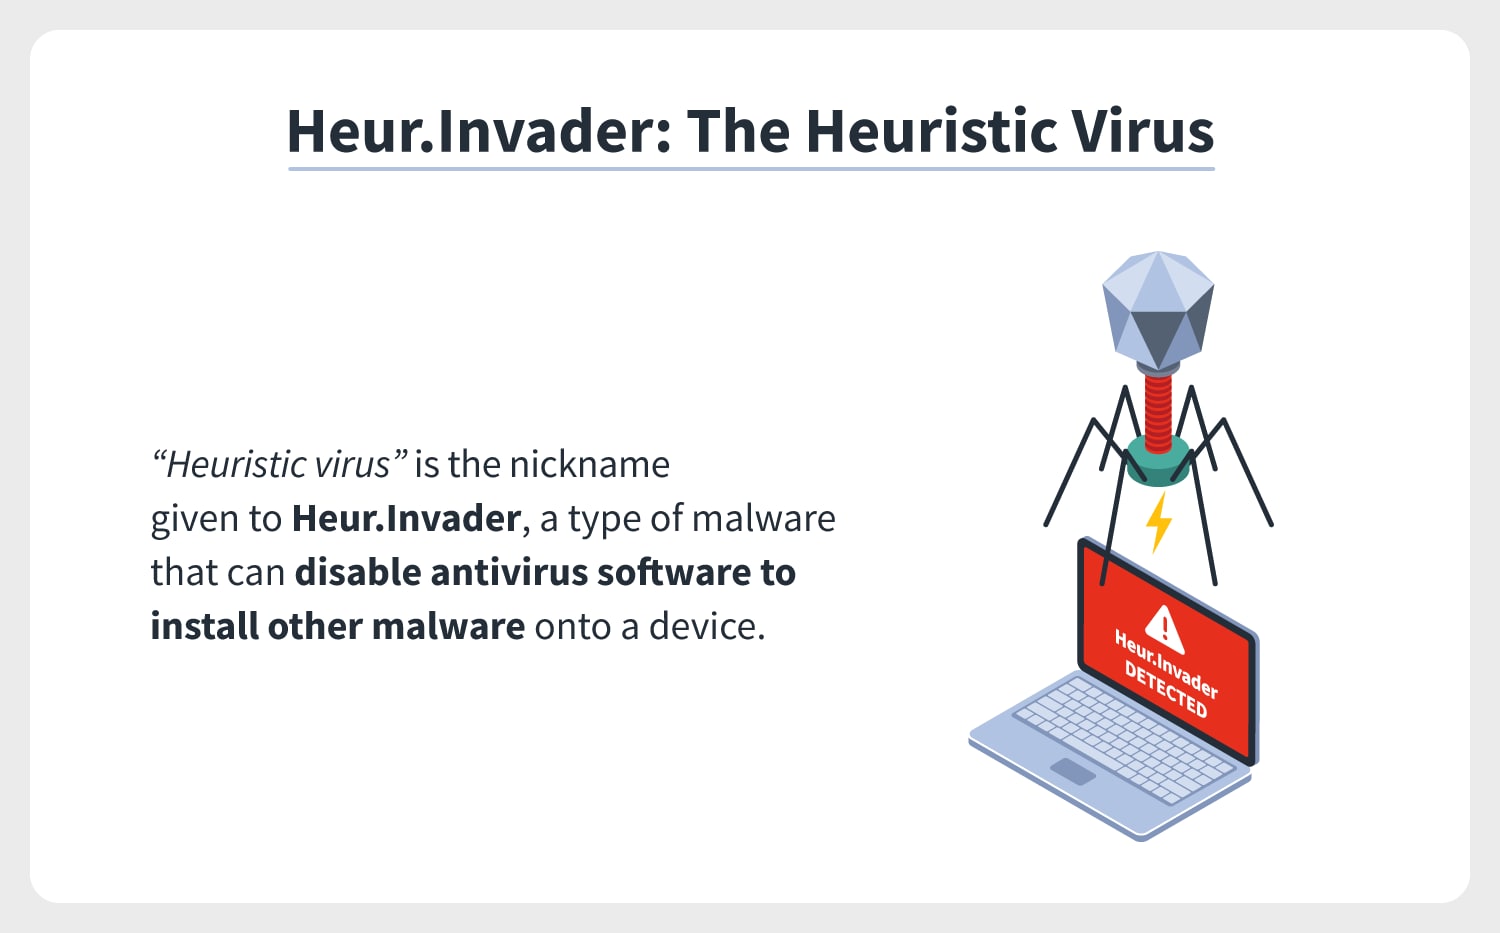 To remove a heuristic virus, enable safe mode, initiate an antivirus scan manually check flagged files for false positives, and delete the identified malware. 